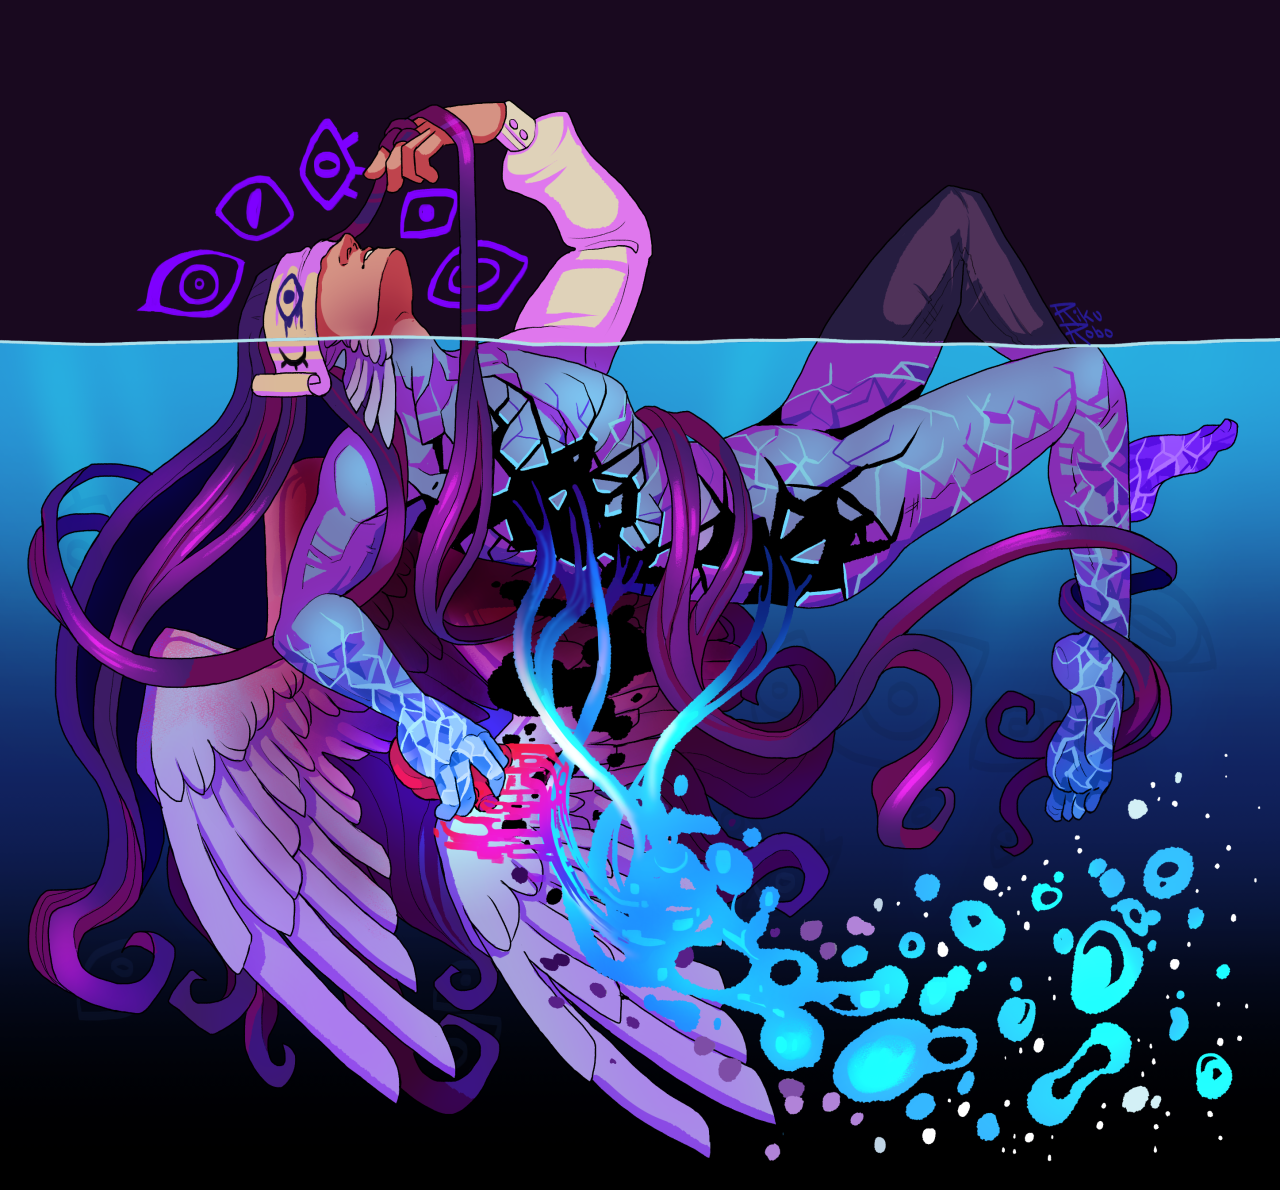 #original art#eldritch #artists on tumblr #wings#eyes#statues#water#oc#oc art#oc adrian#eldritch aesthetic#ethereal #hello I am alive and return with the most self-indulgent art  #I am trying to get back into art and streaming things  #thank you for sticking around #digital art